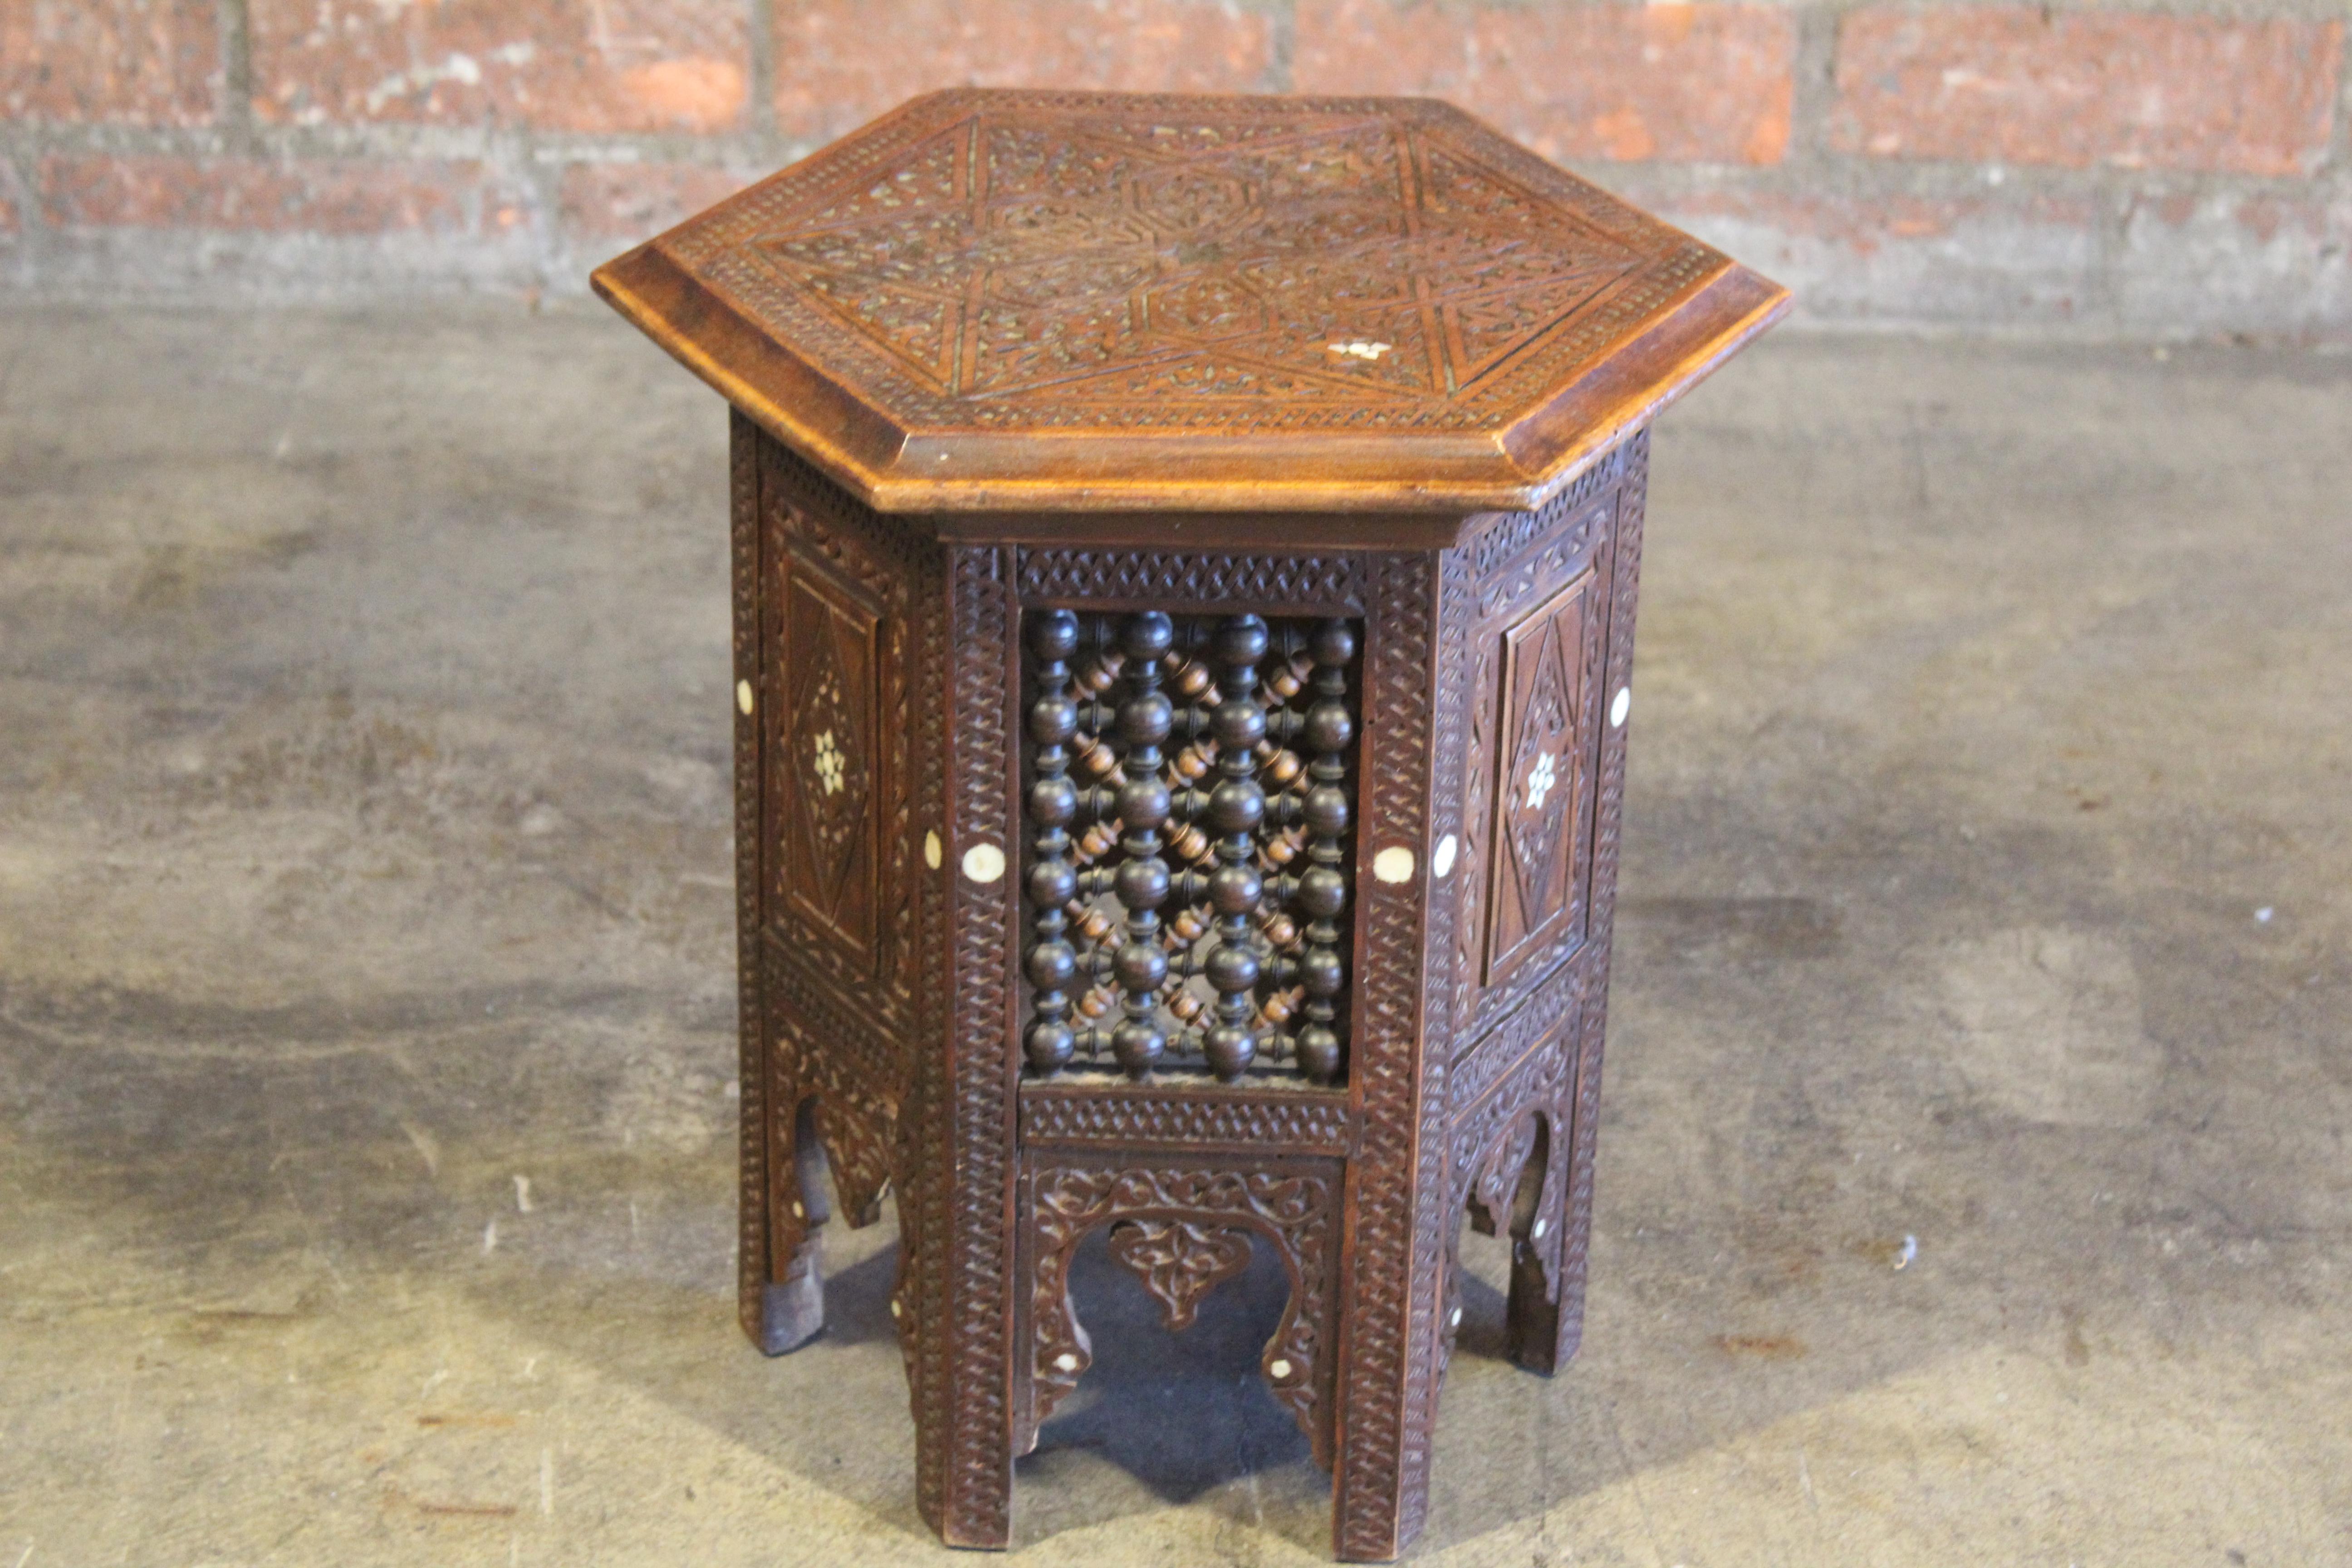 A vintage carved and inlaid Moorish style side table. In good condition with age appropriate wear.